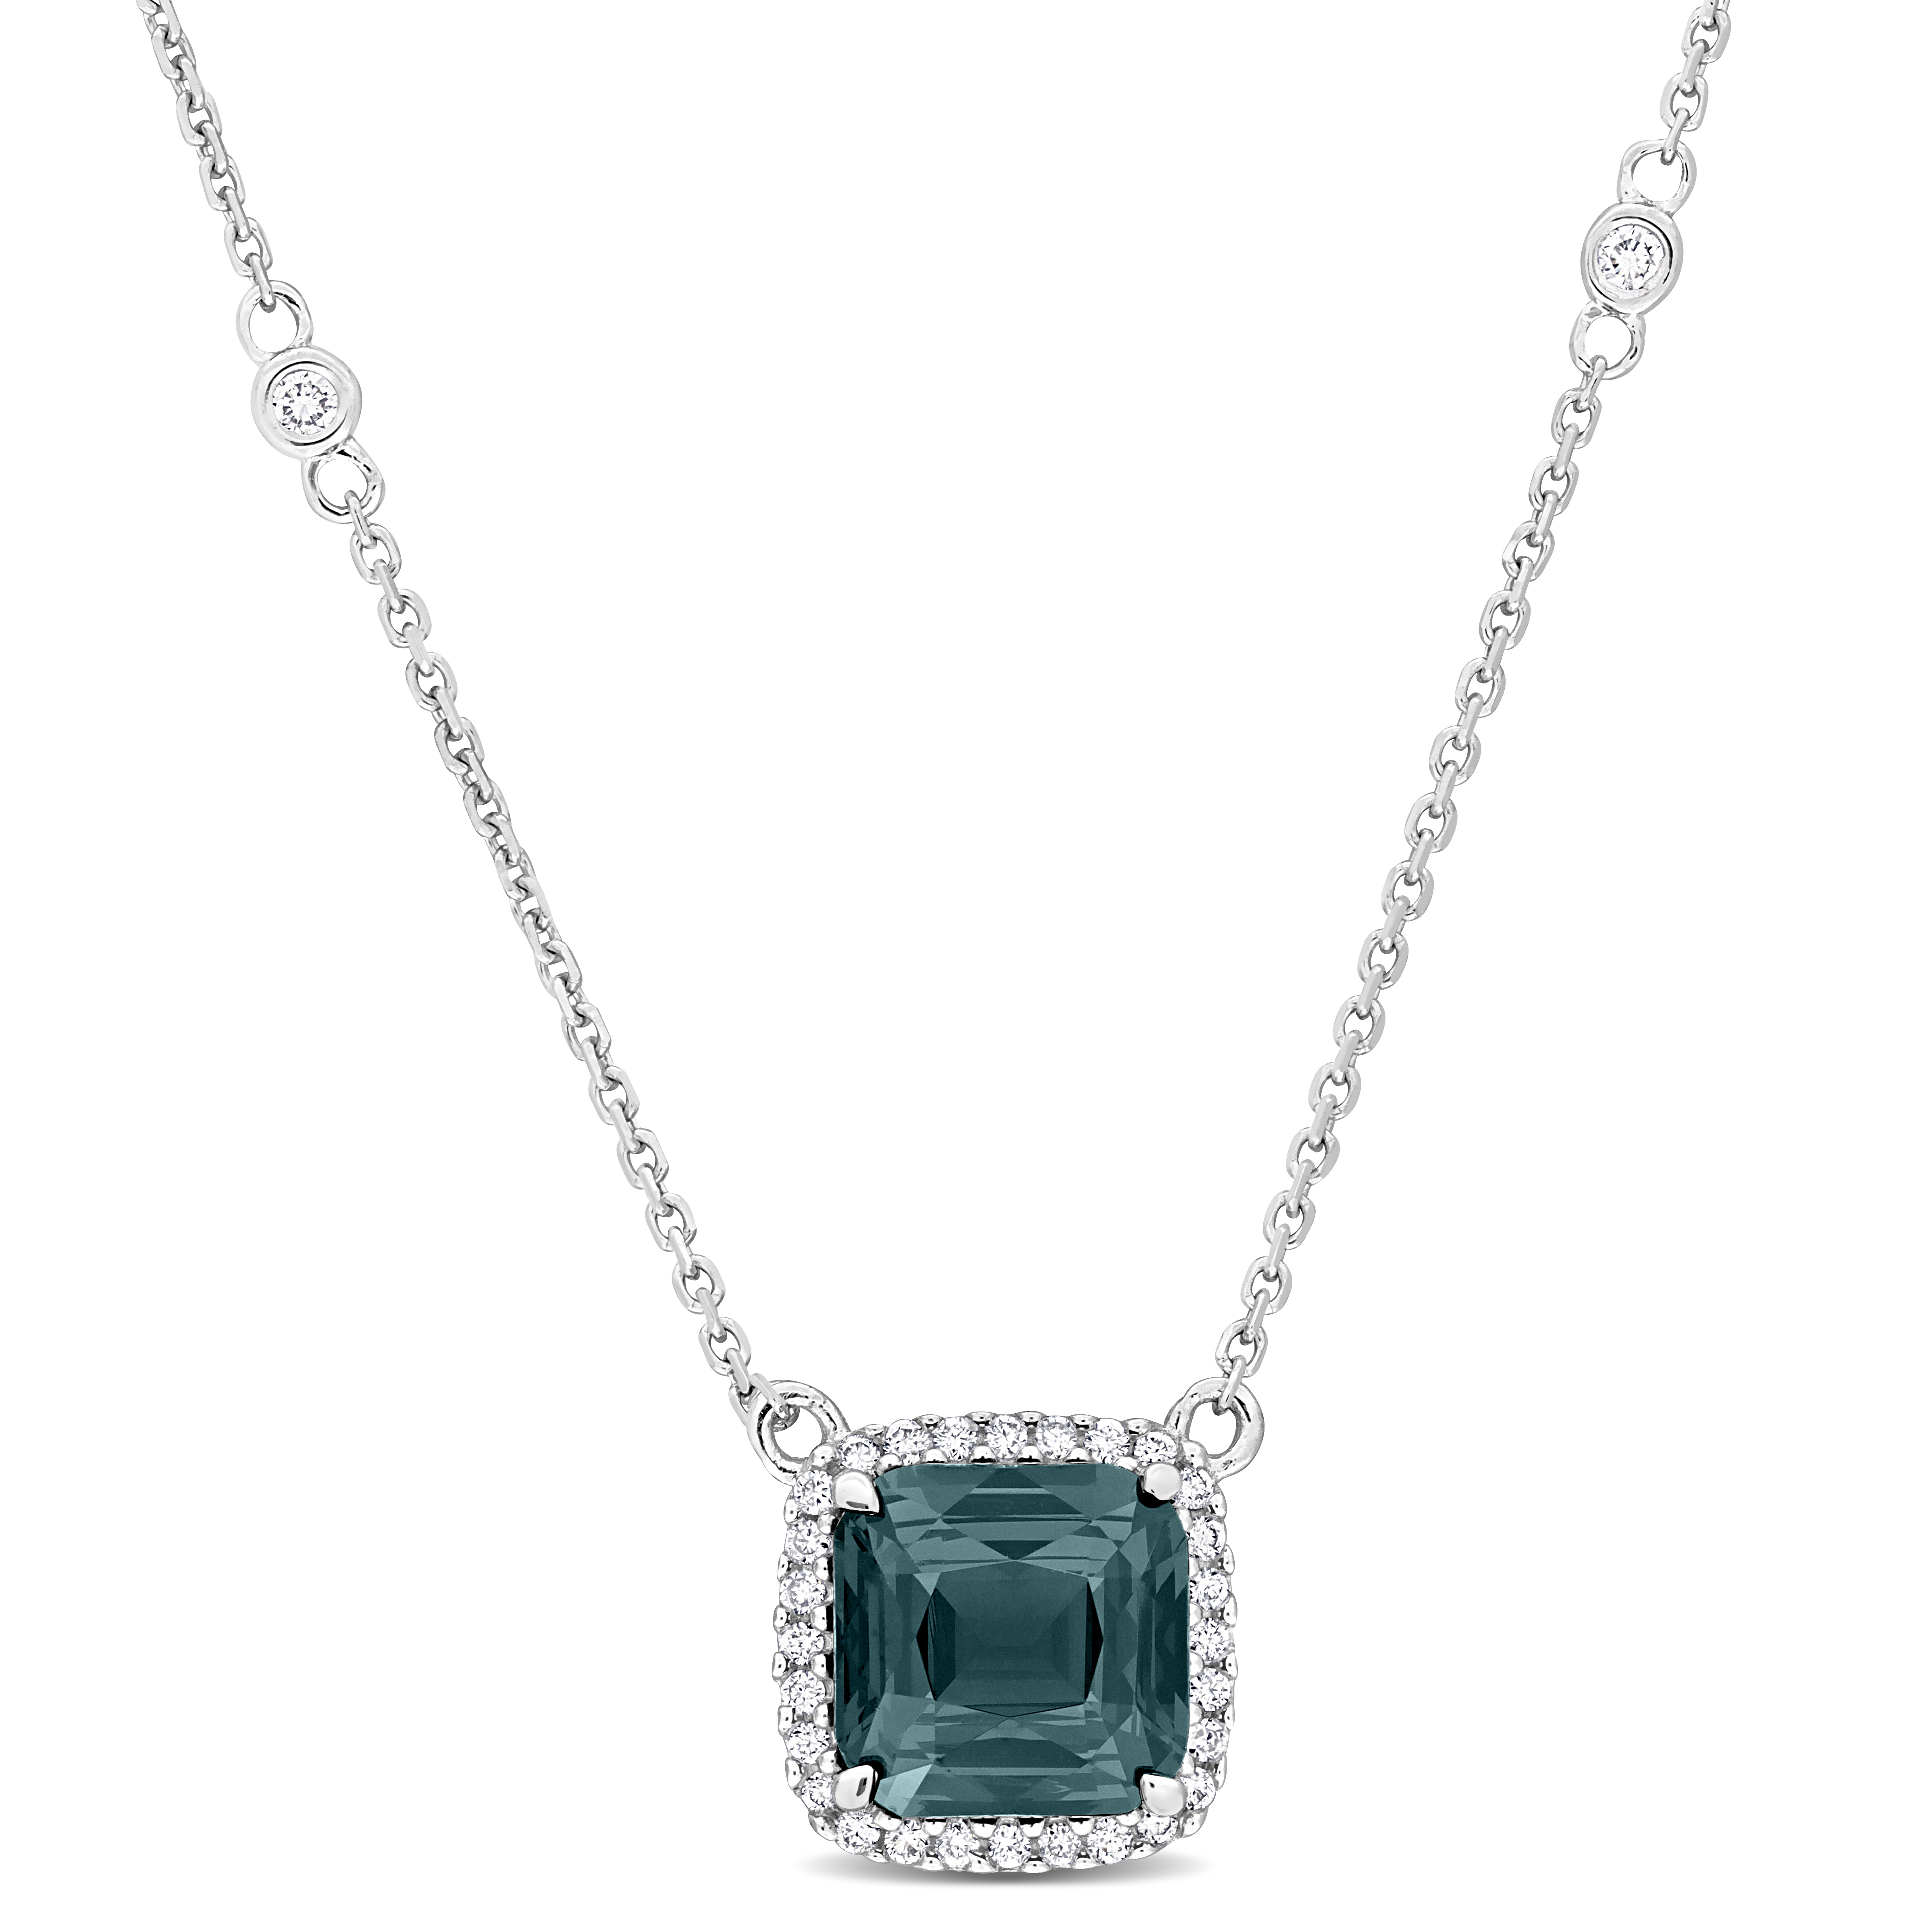 2 1/5 CT TGW Blue Spinel 1/10 CT TDW Diamond Halo Necklace in 14k White Gold - 16 in.